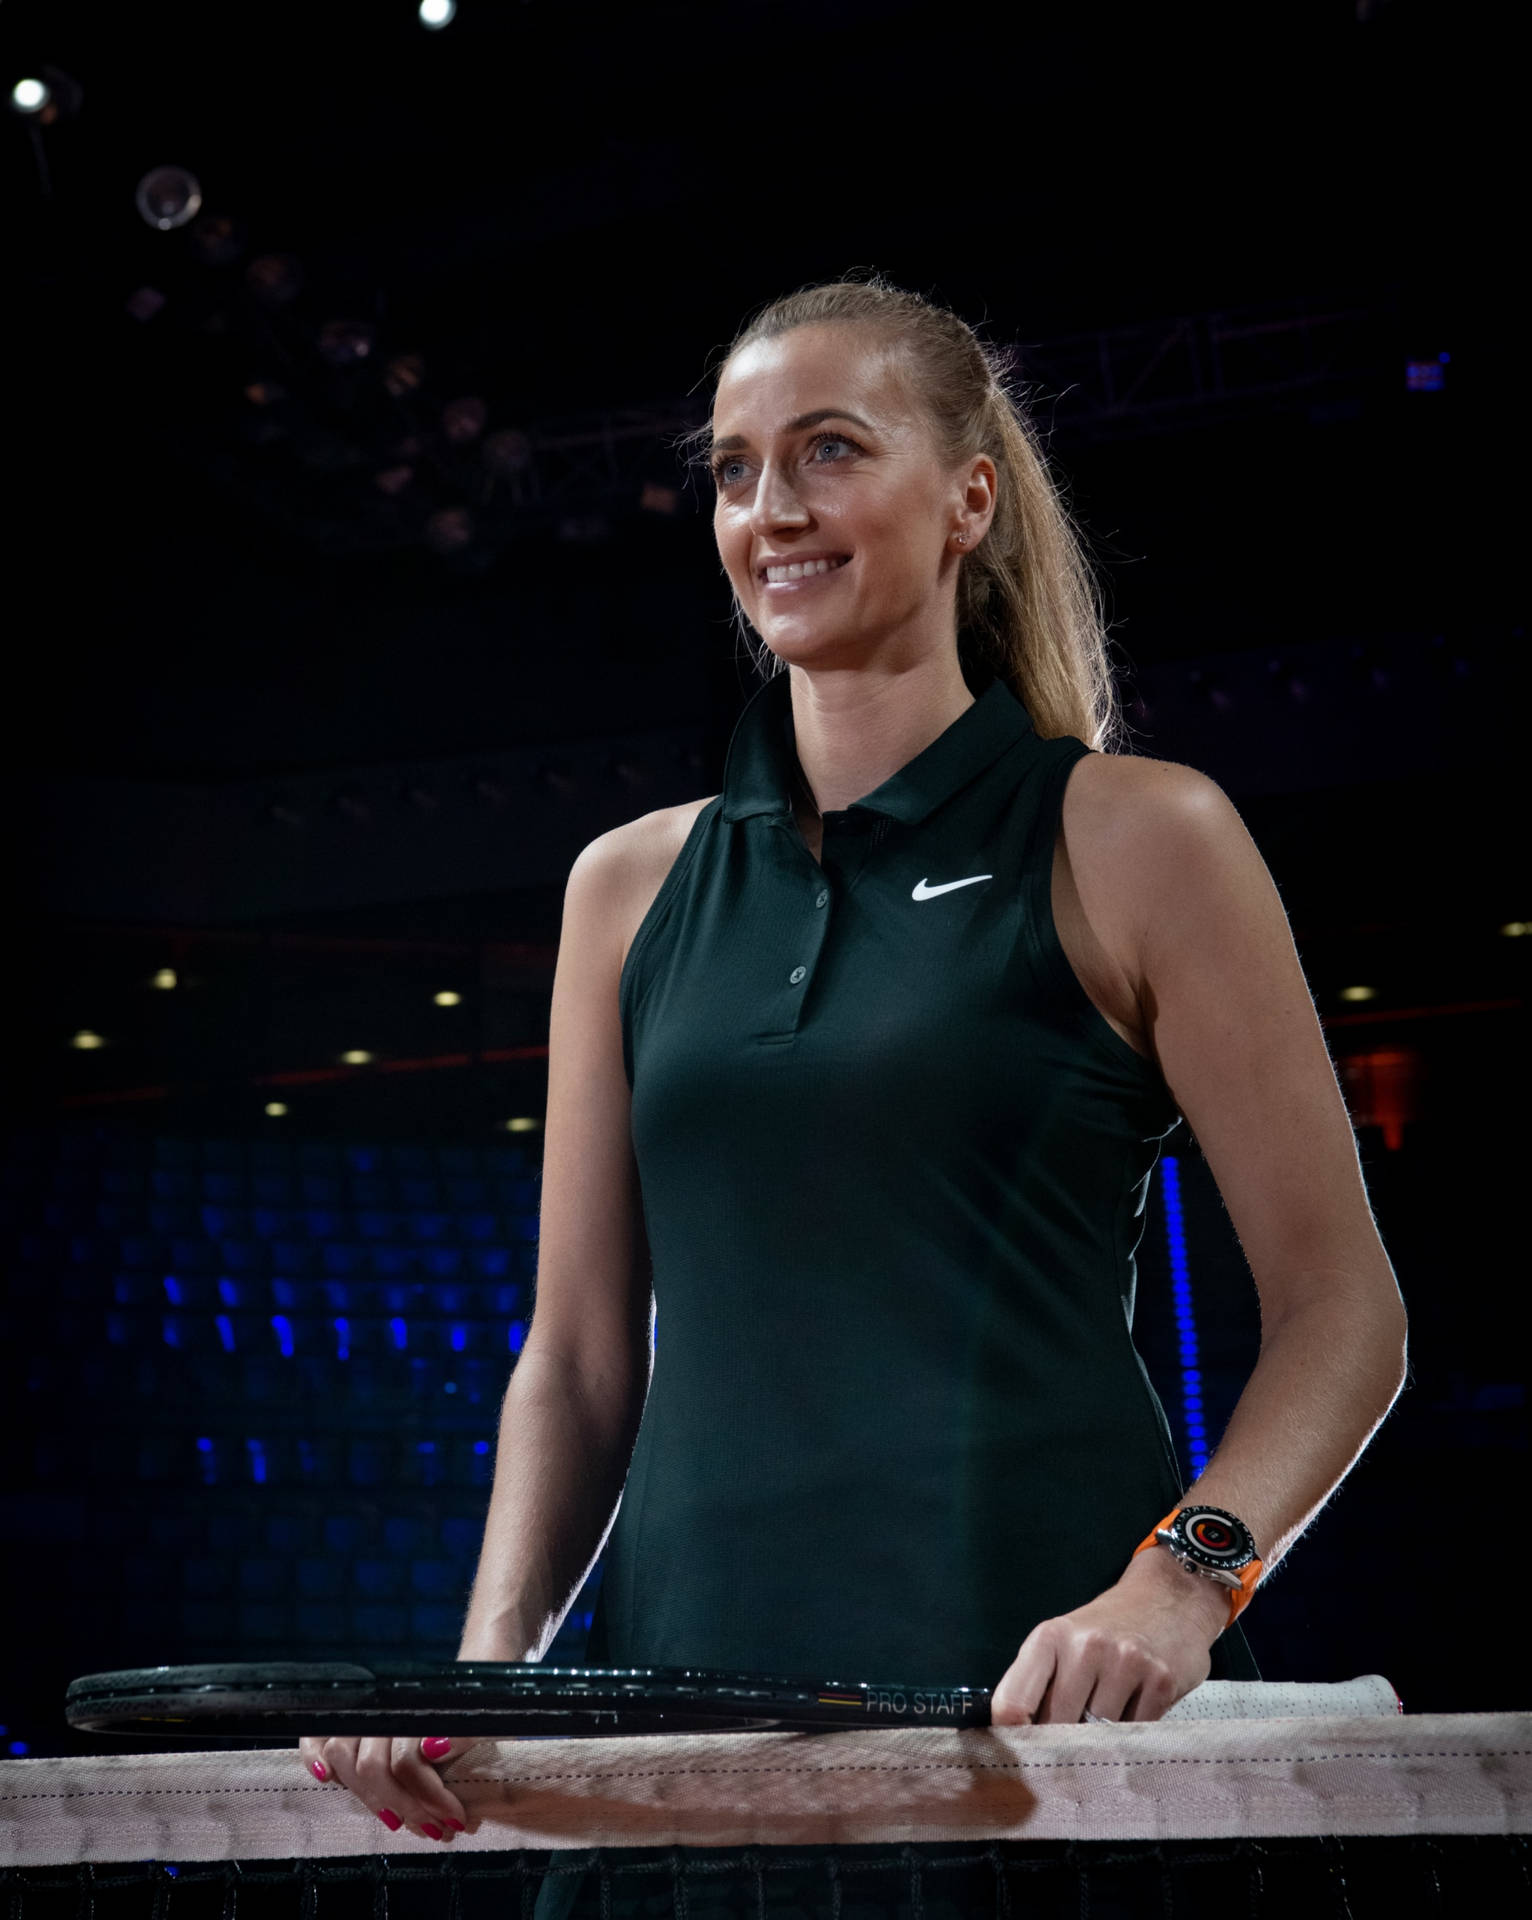 Petra Kvitova Smiling And Radiating Positivity In A Standing Pose